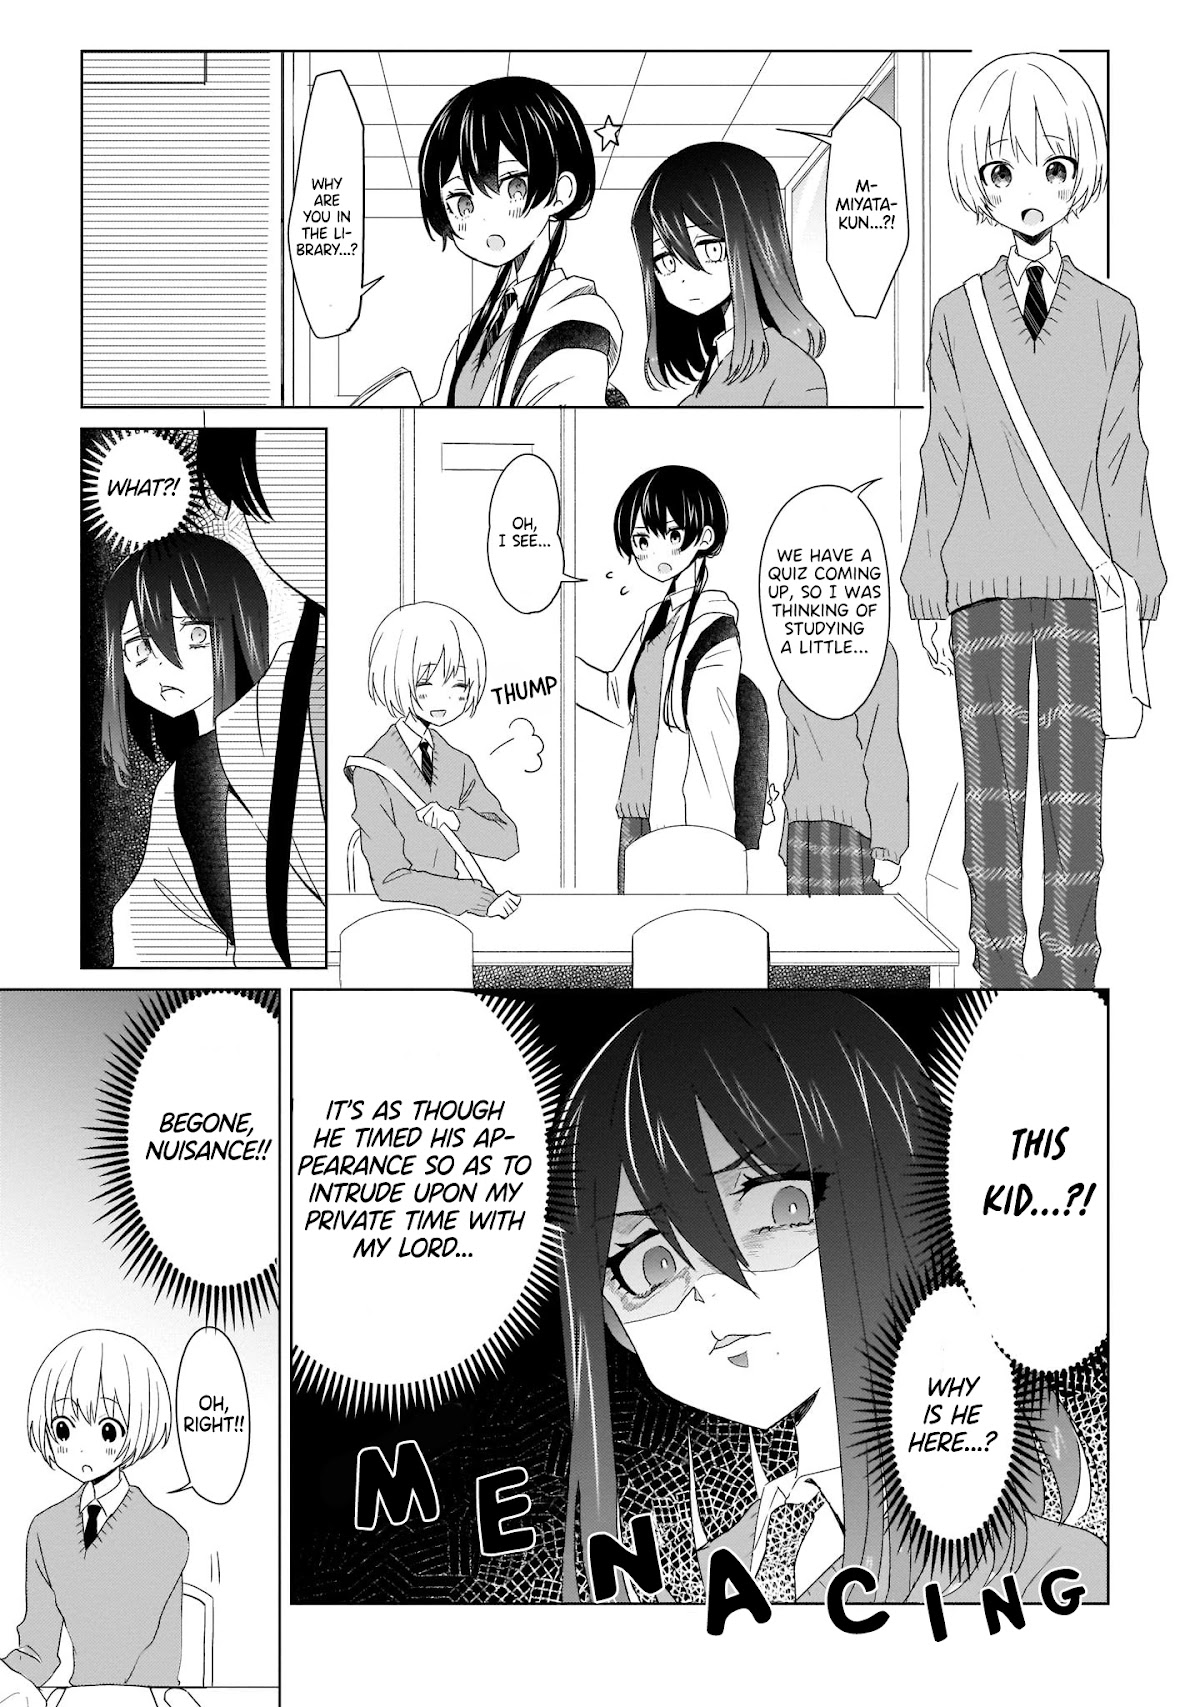 The Demon Lord's Love Life Isn't Going Well - Page 3